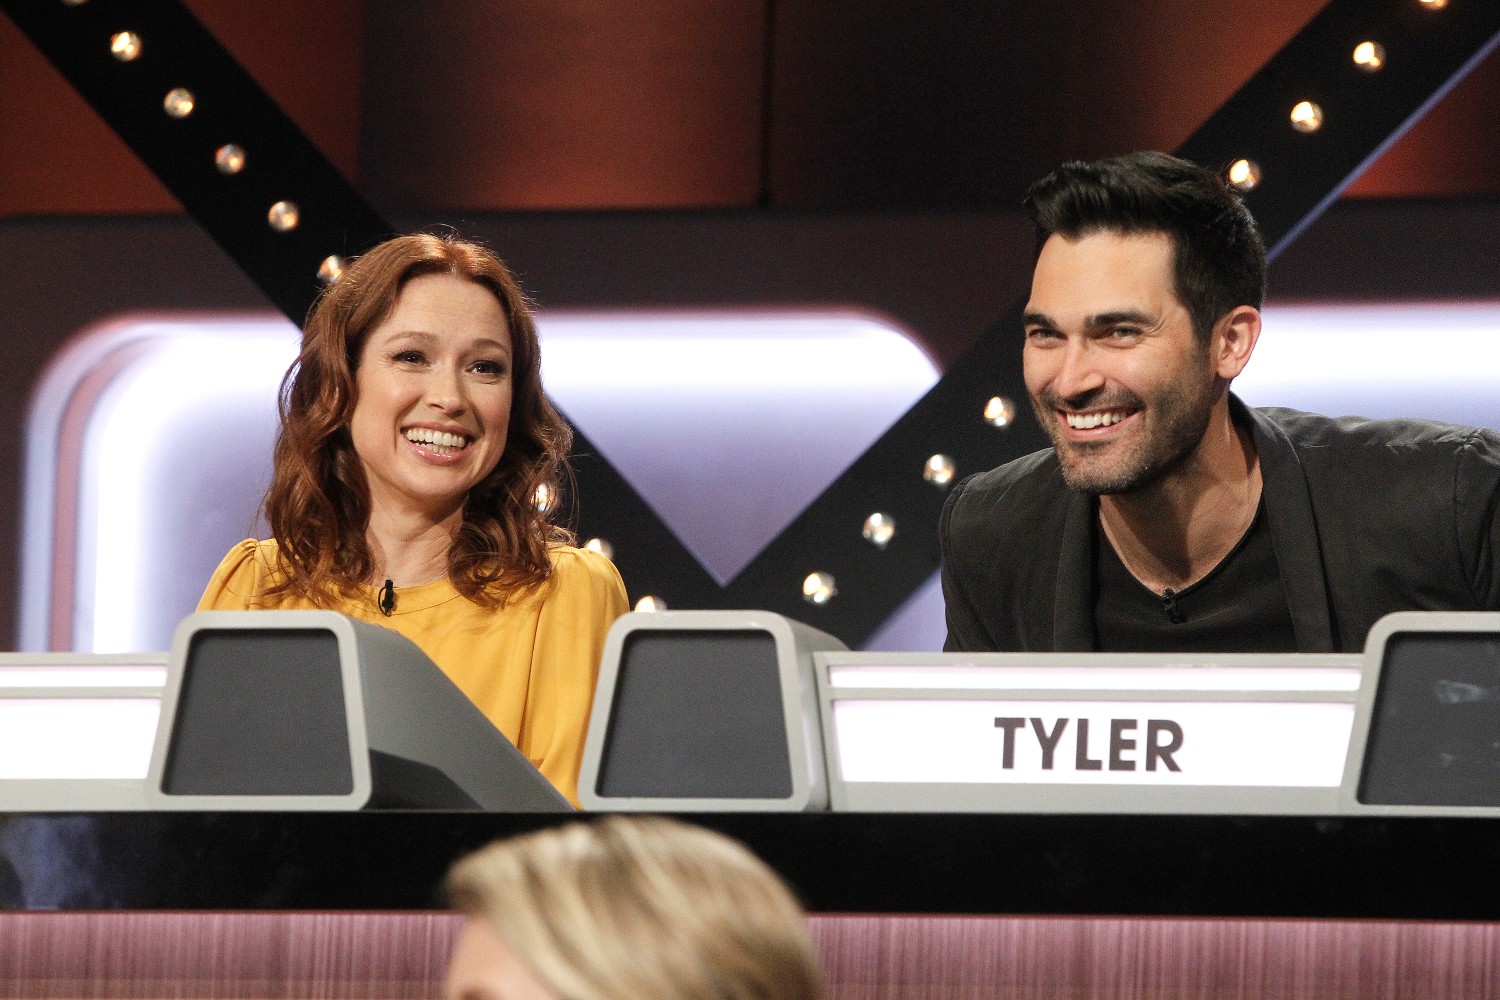 Ellie Kemper and Tyler Hoechlin on ABC's Match Game January 9, 2019